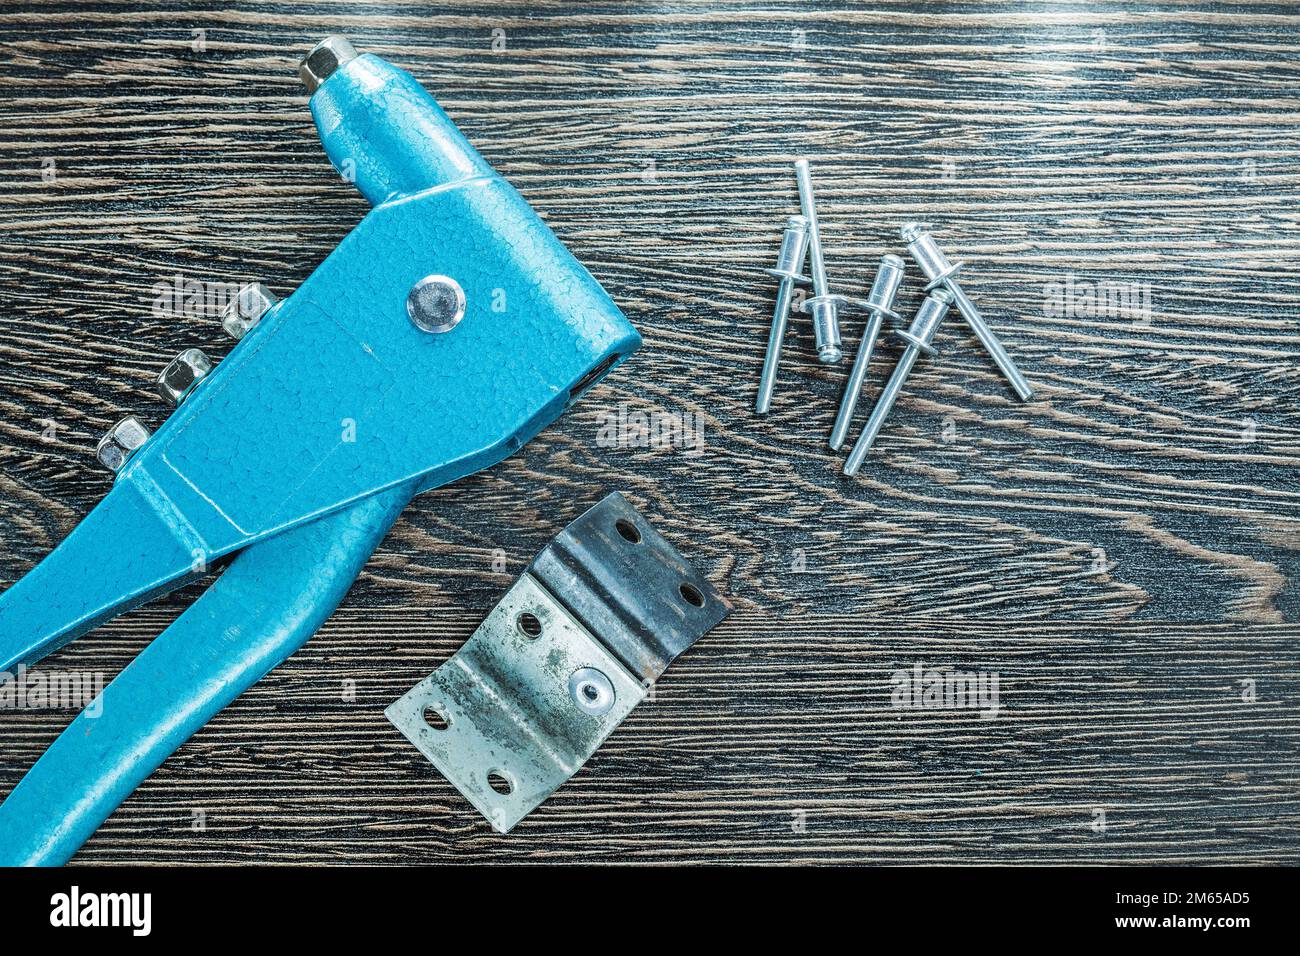 Set of riveting pliers rivets screws on wooden board. Stock Photo